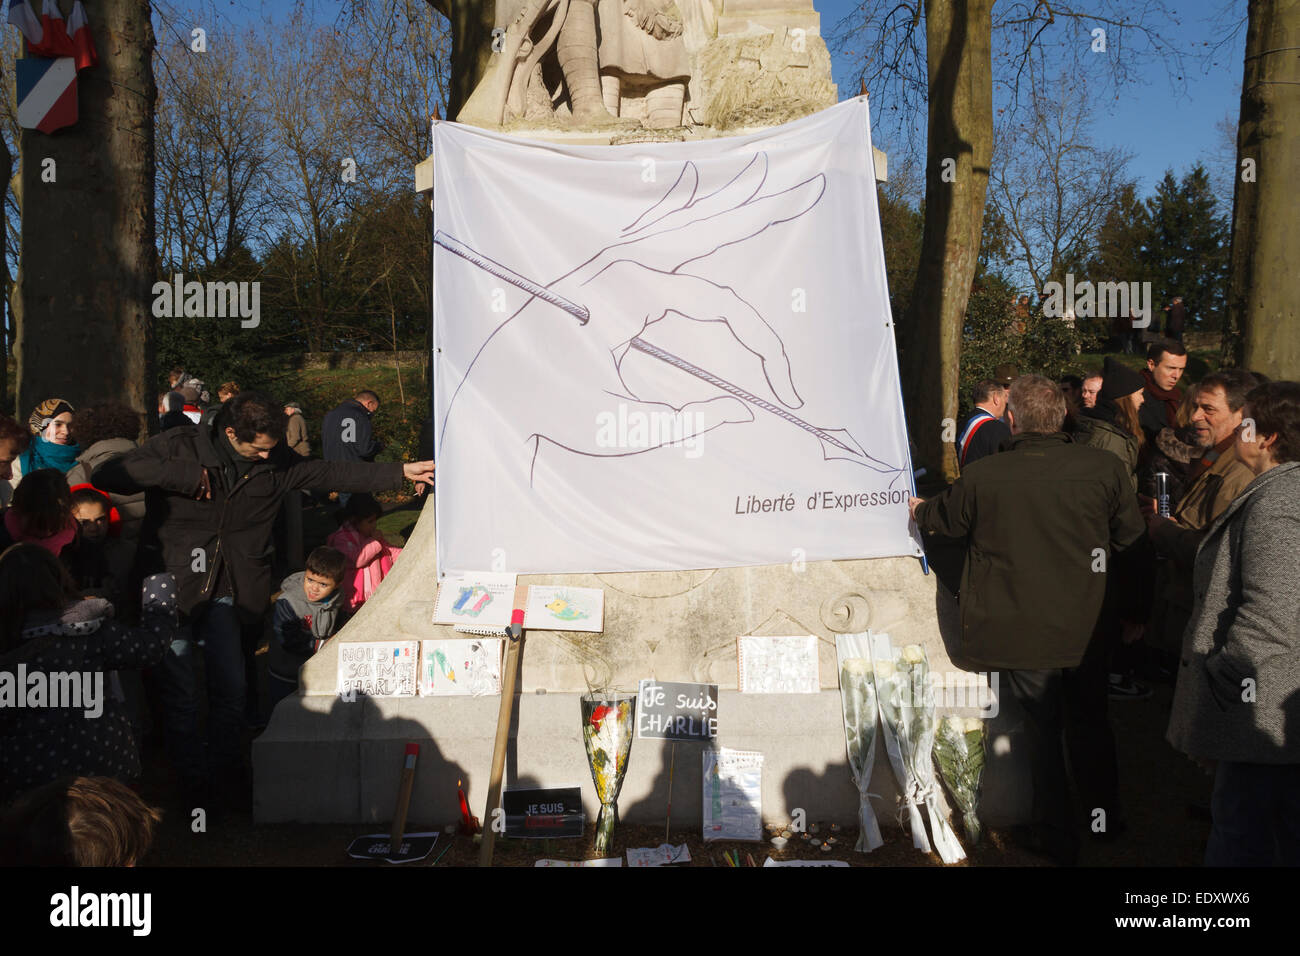 Abmoise, France. 11th January, 2015. French people against terrorist attack on Charlie Hebdo on 07 January 2015, gathering in Abmoise, France sunday january 11th Credit:  Pierre Guillaume/Alamy Live News Stock Photo